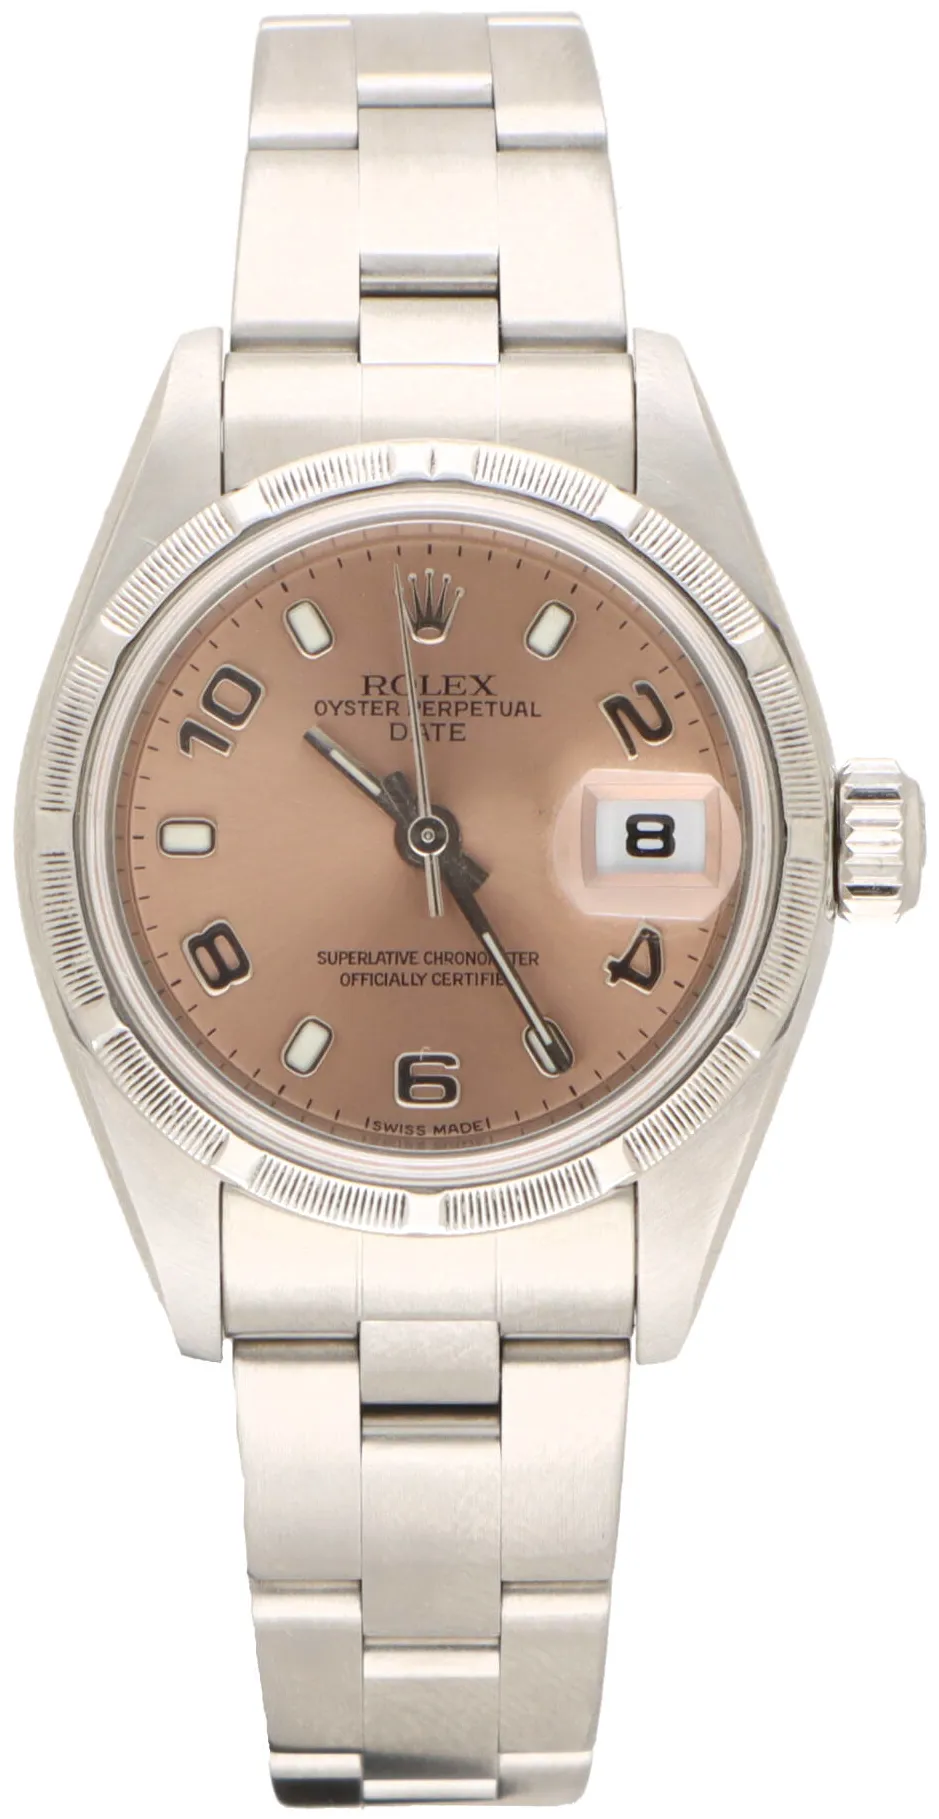 Rolex Oyster Perpetual Date 79190 26mm Stainless steel